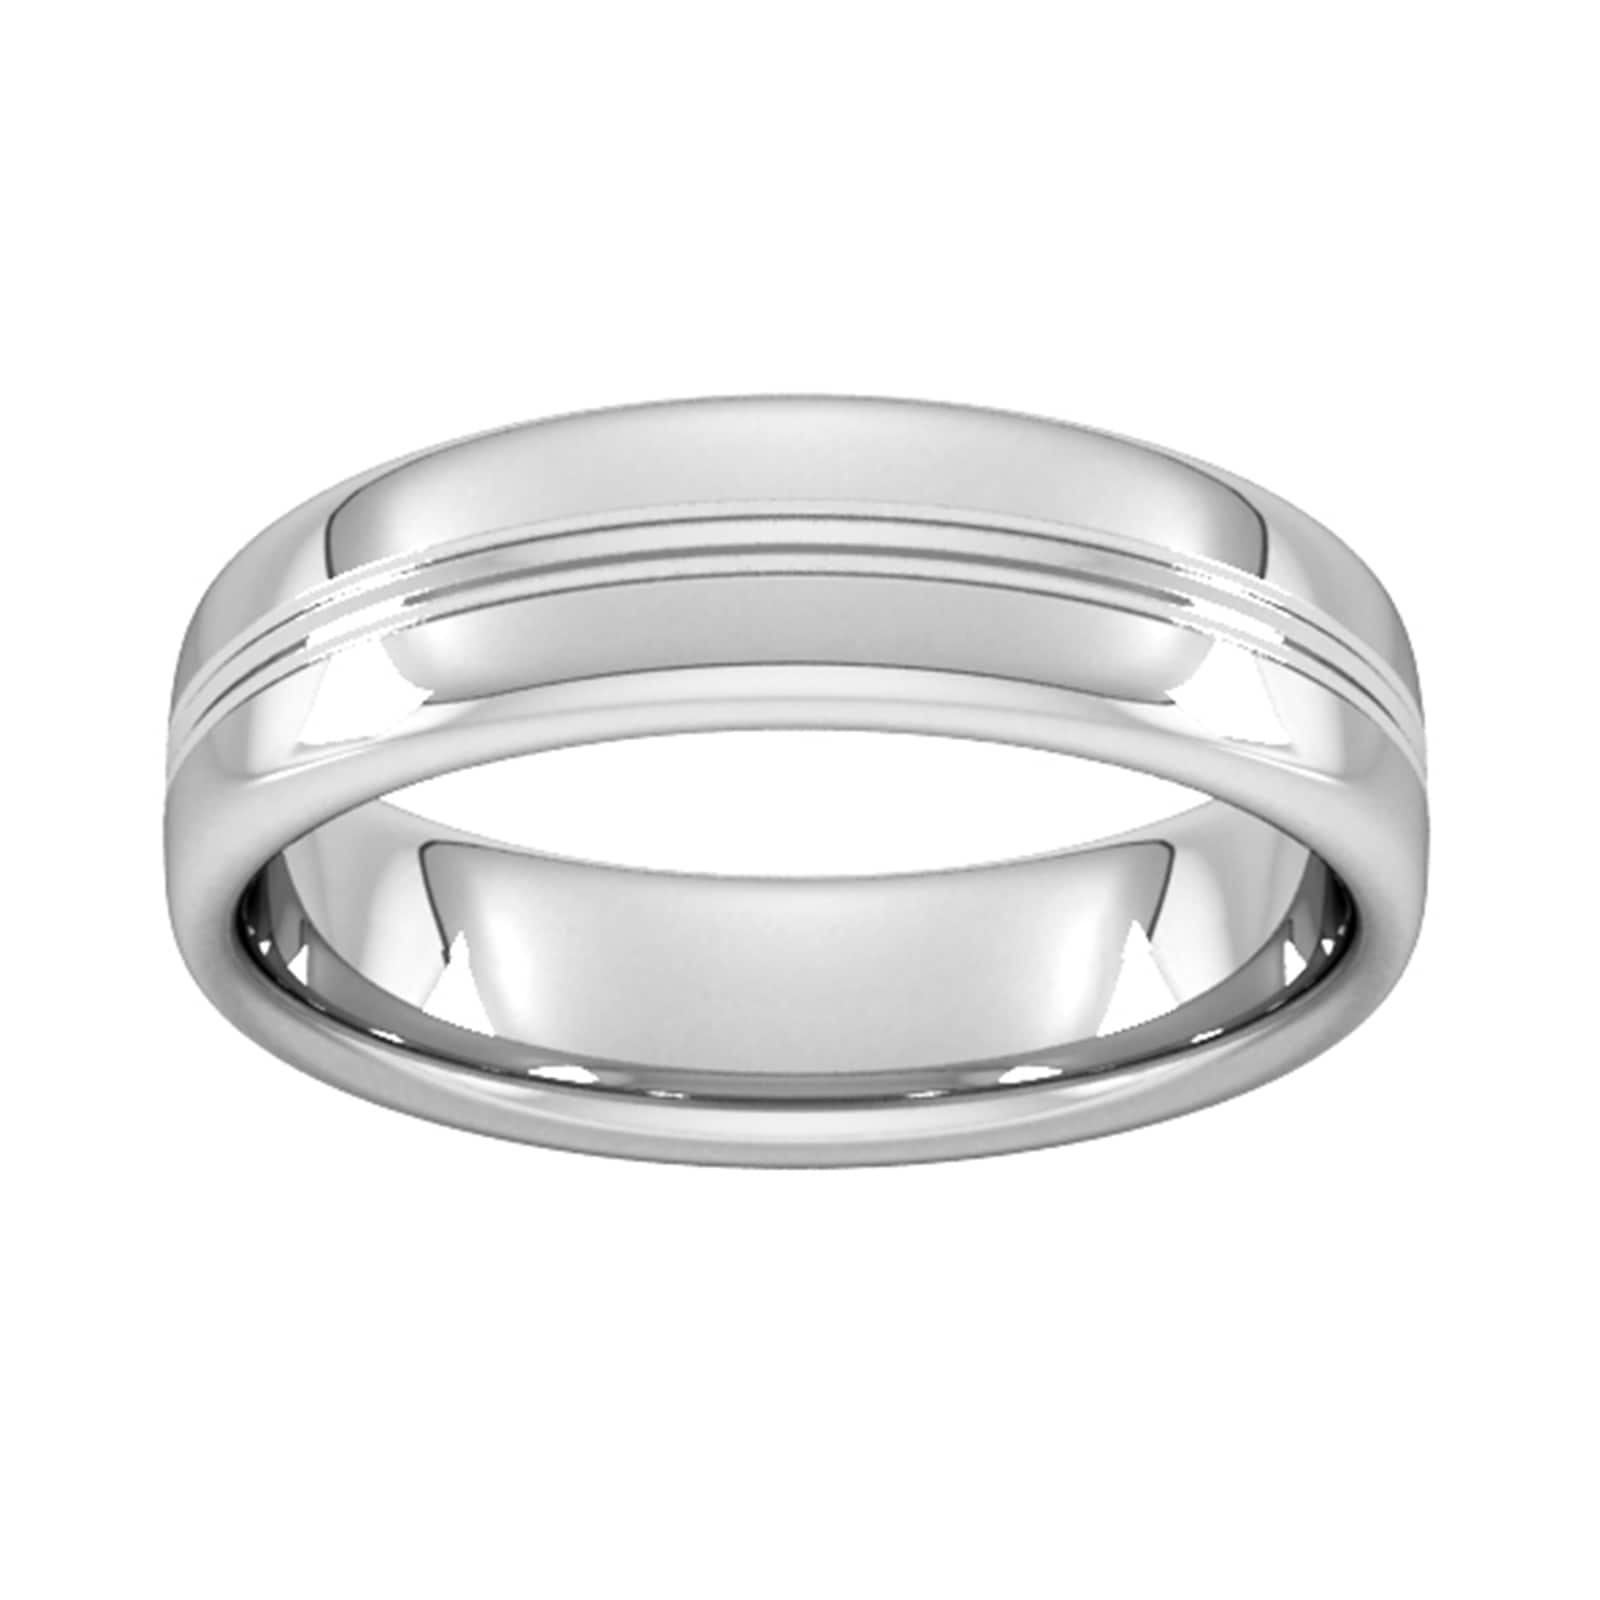 6mm Slight Court Heavy Grooved Polished Finish Wedding Ring In Platinum - Ring Size S